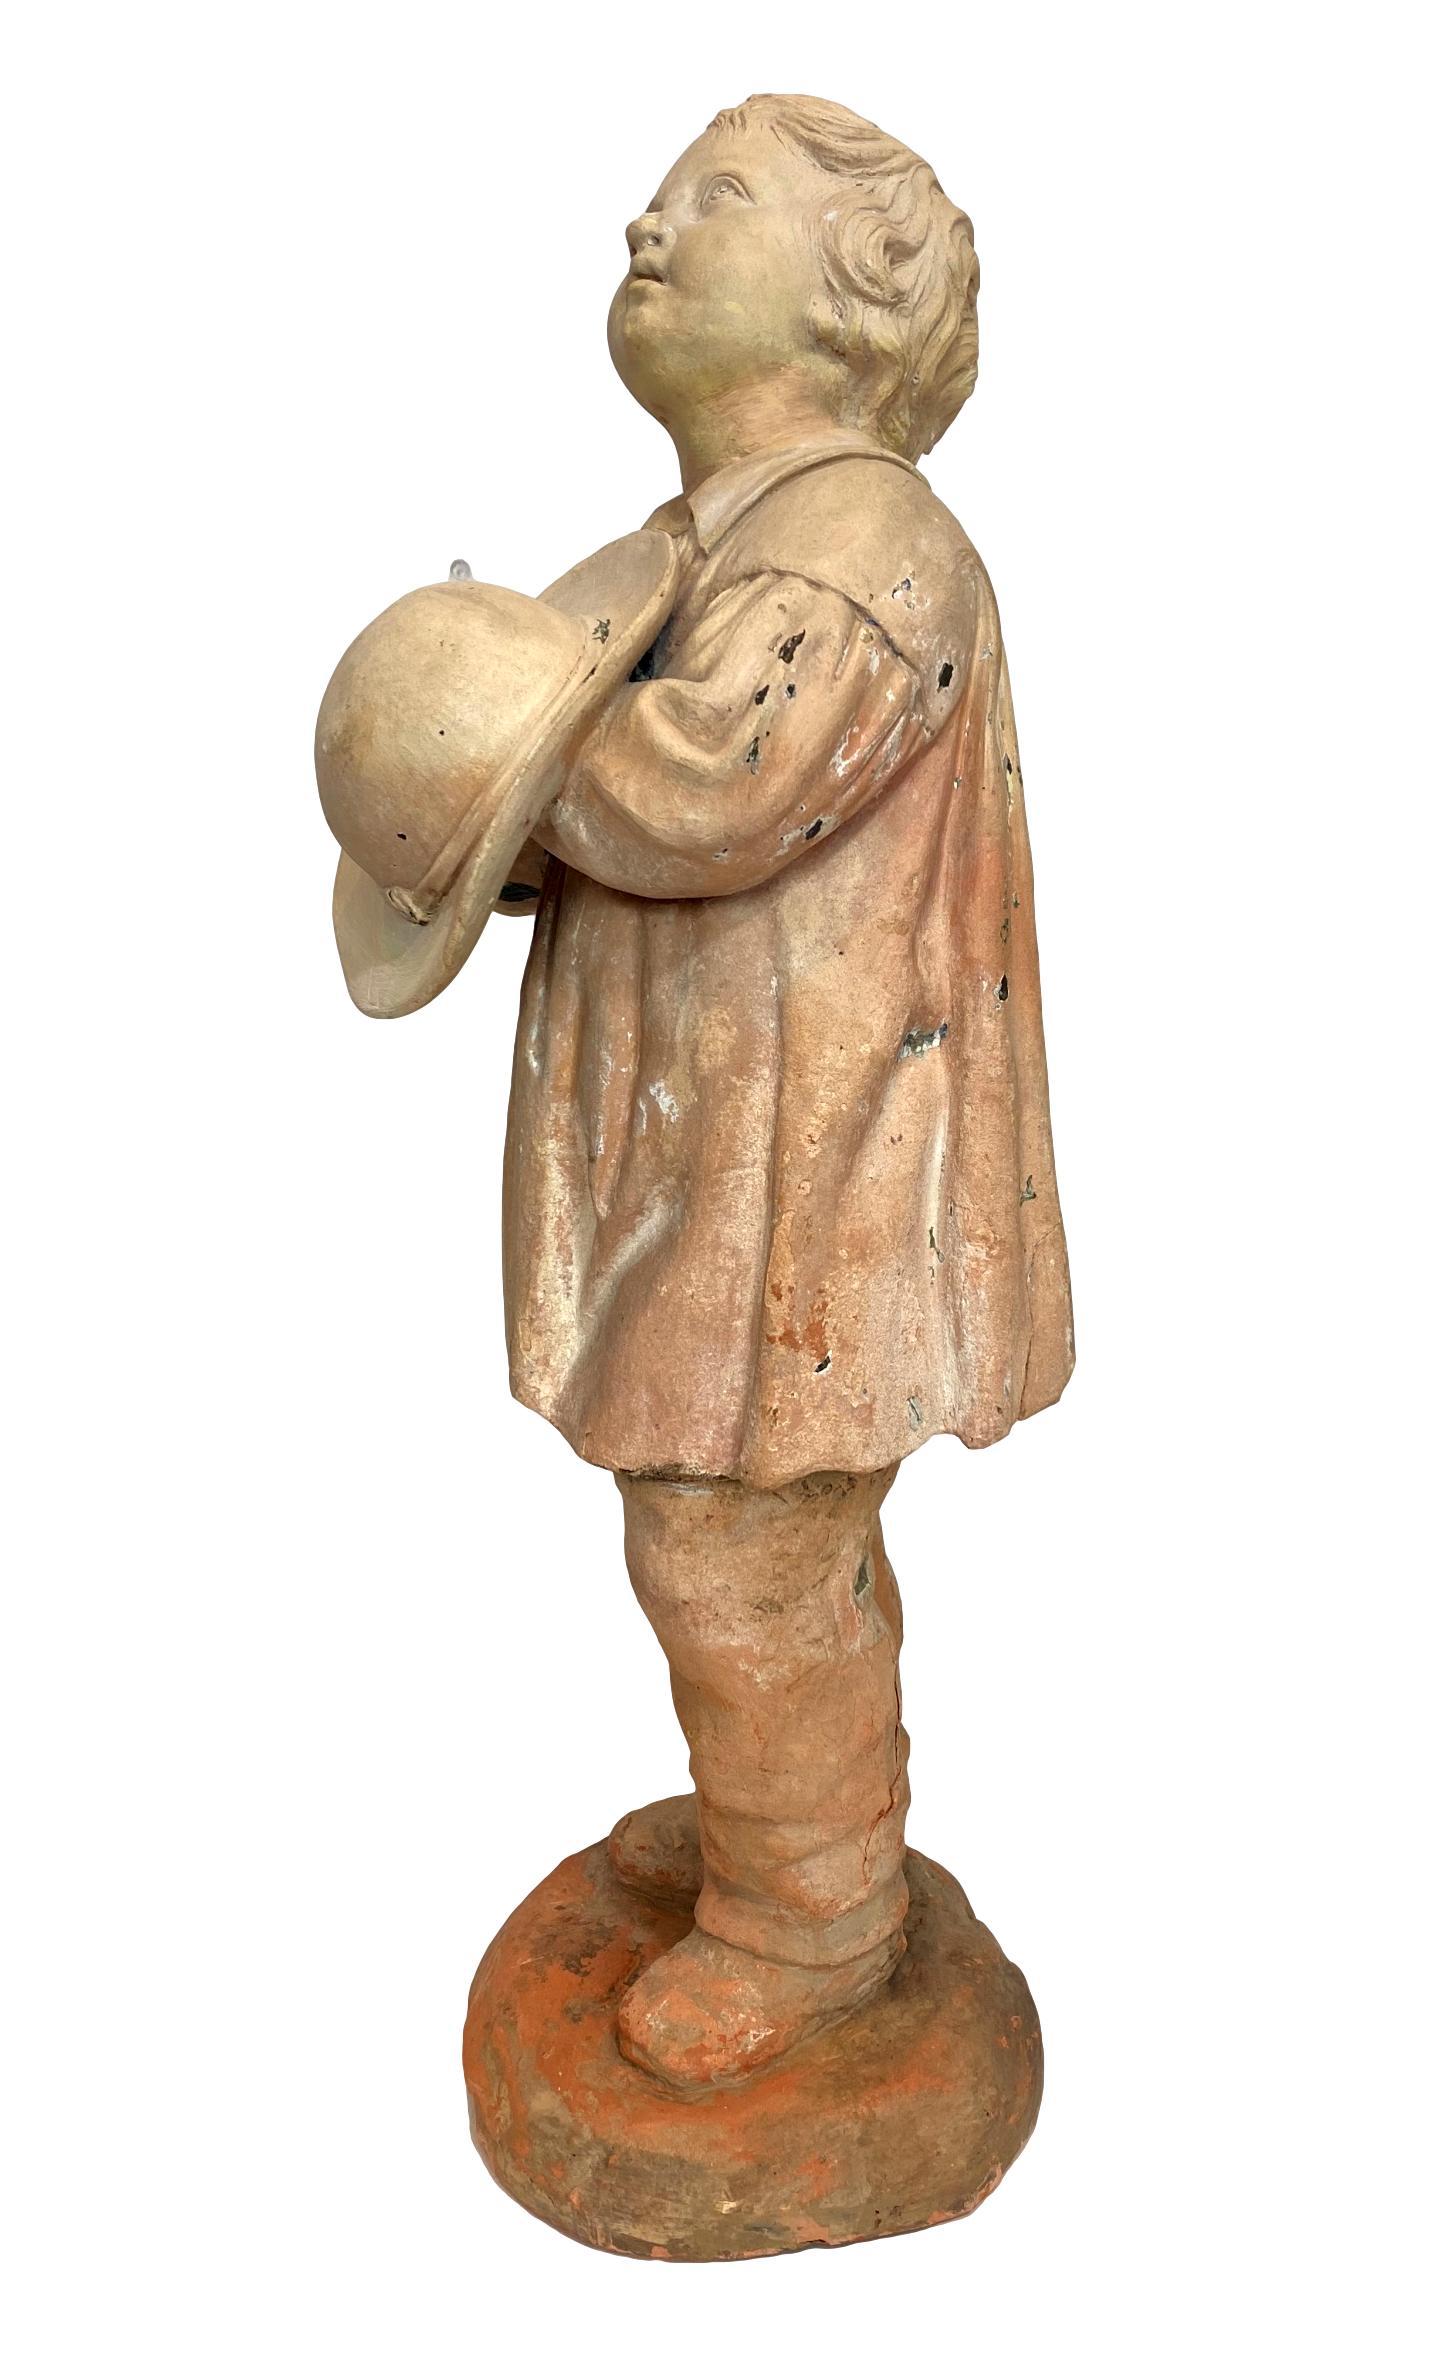 Charming terra cotta figure of a boy with hat, staring into the heavens, French, ca. 1890. Measures: 21 inches high.